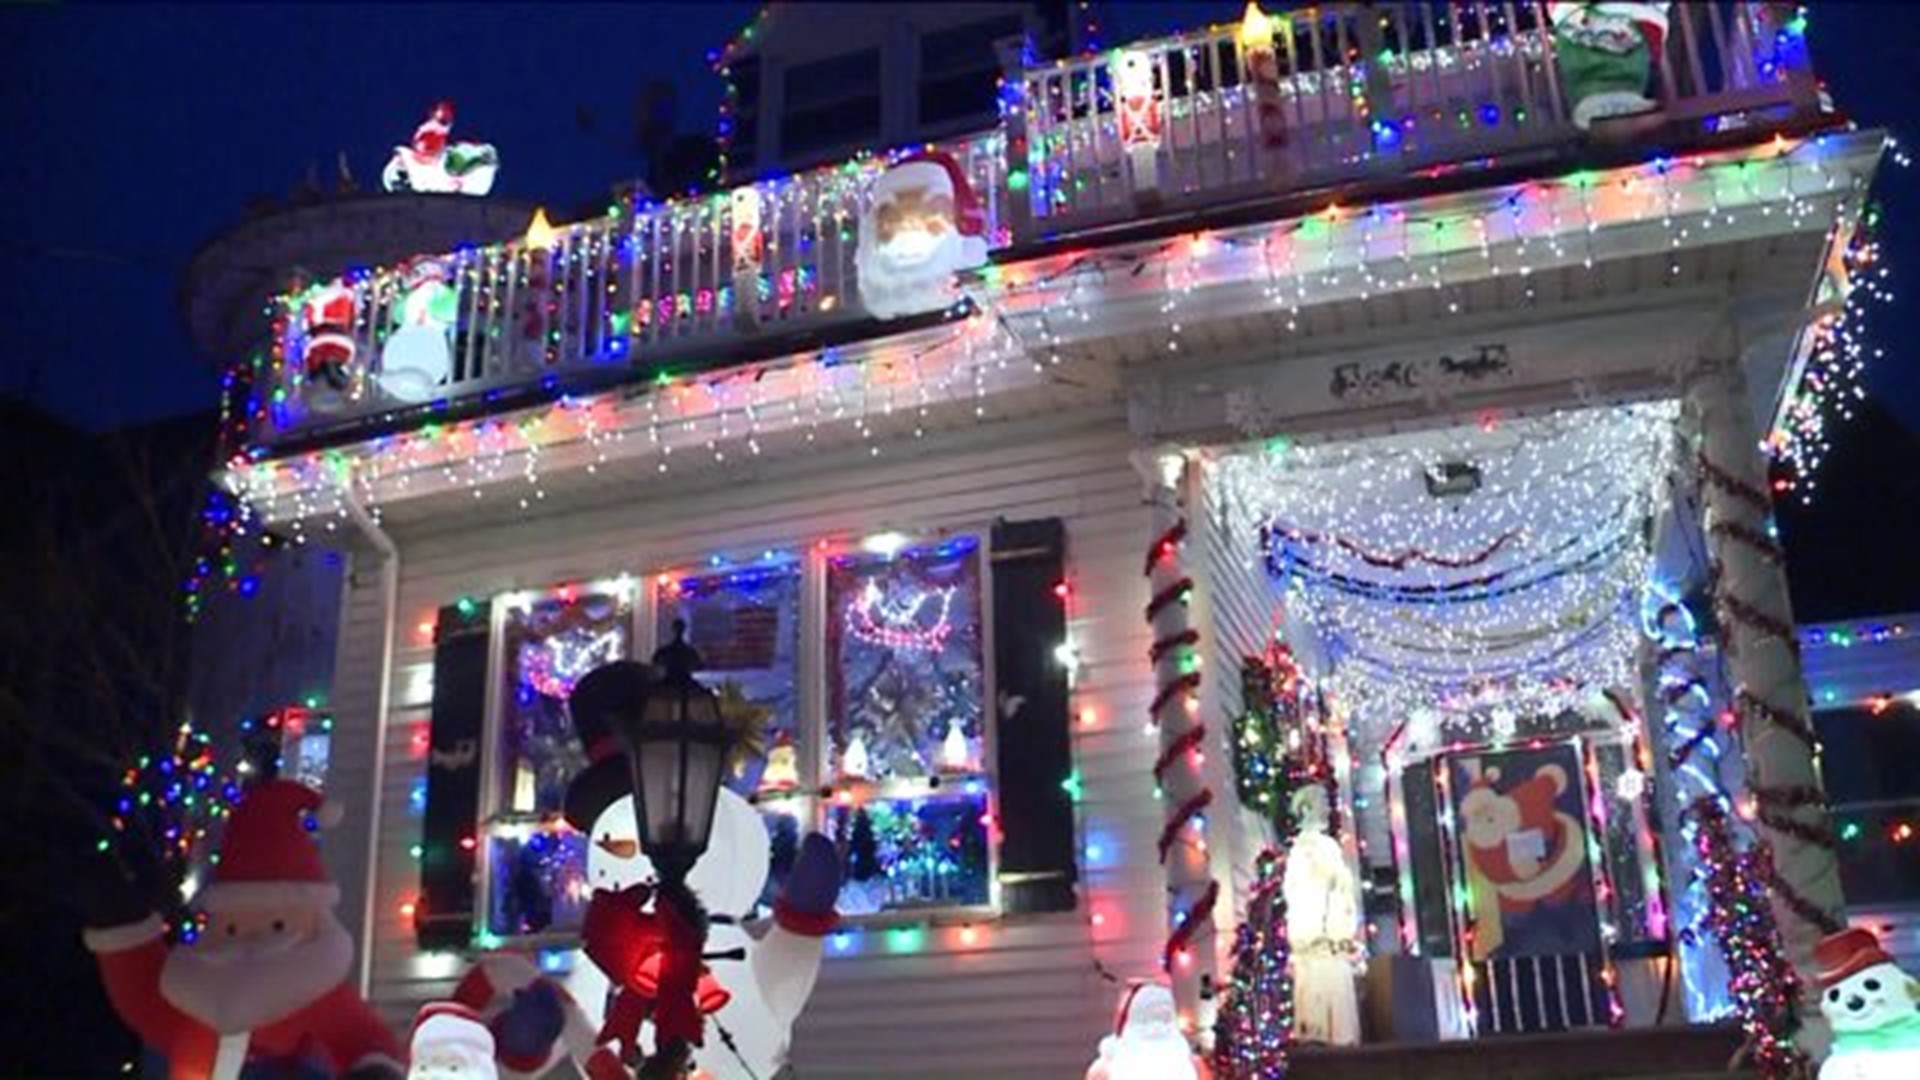 Lighting up for Christmas in New Britain